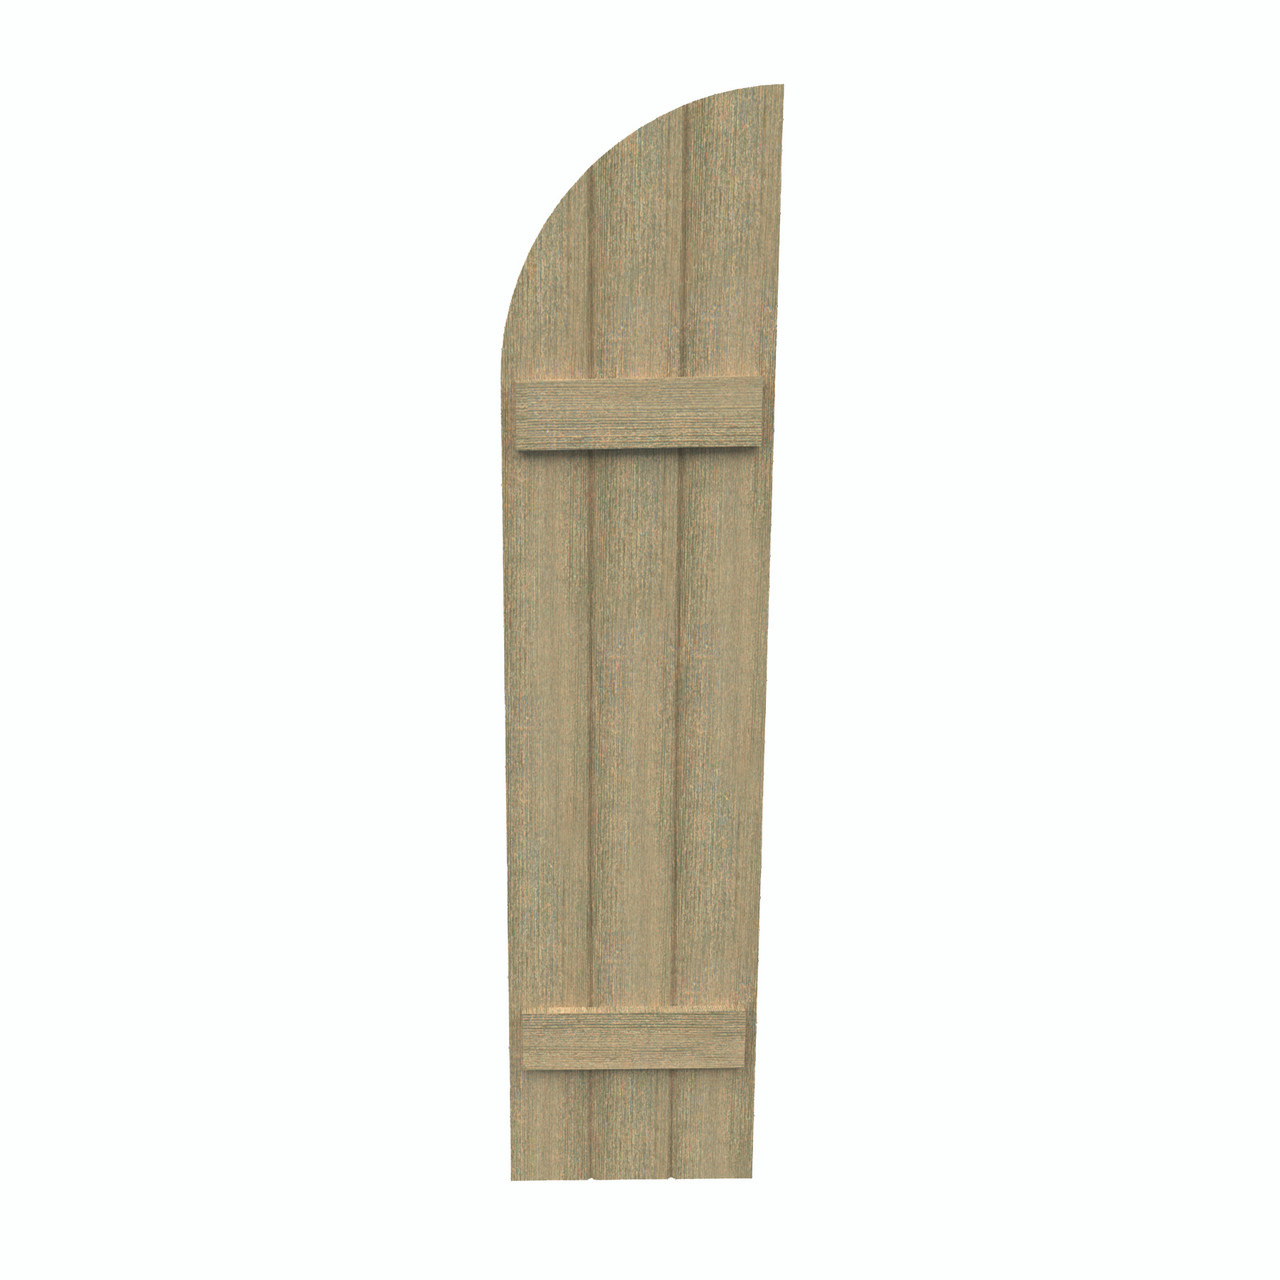 18 inch by 106 inch Quarter Round Shutter with 3-Boards